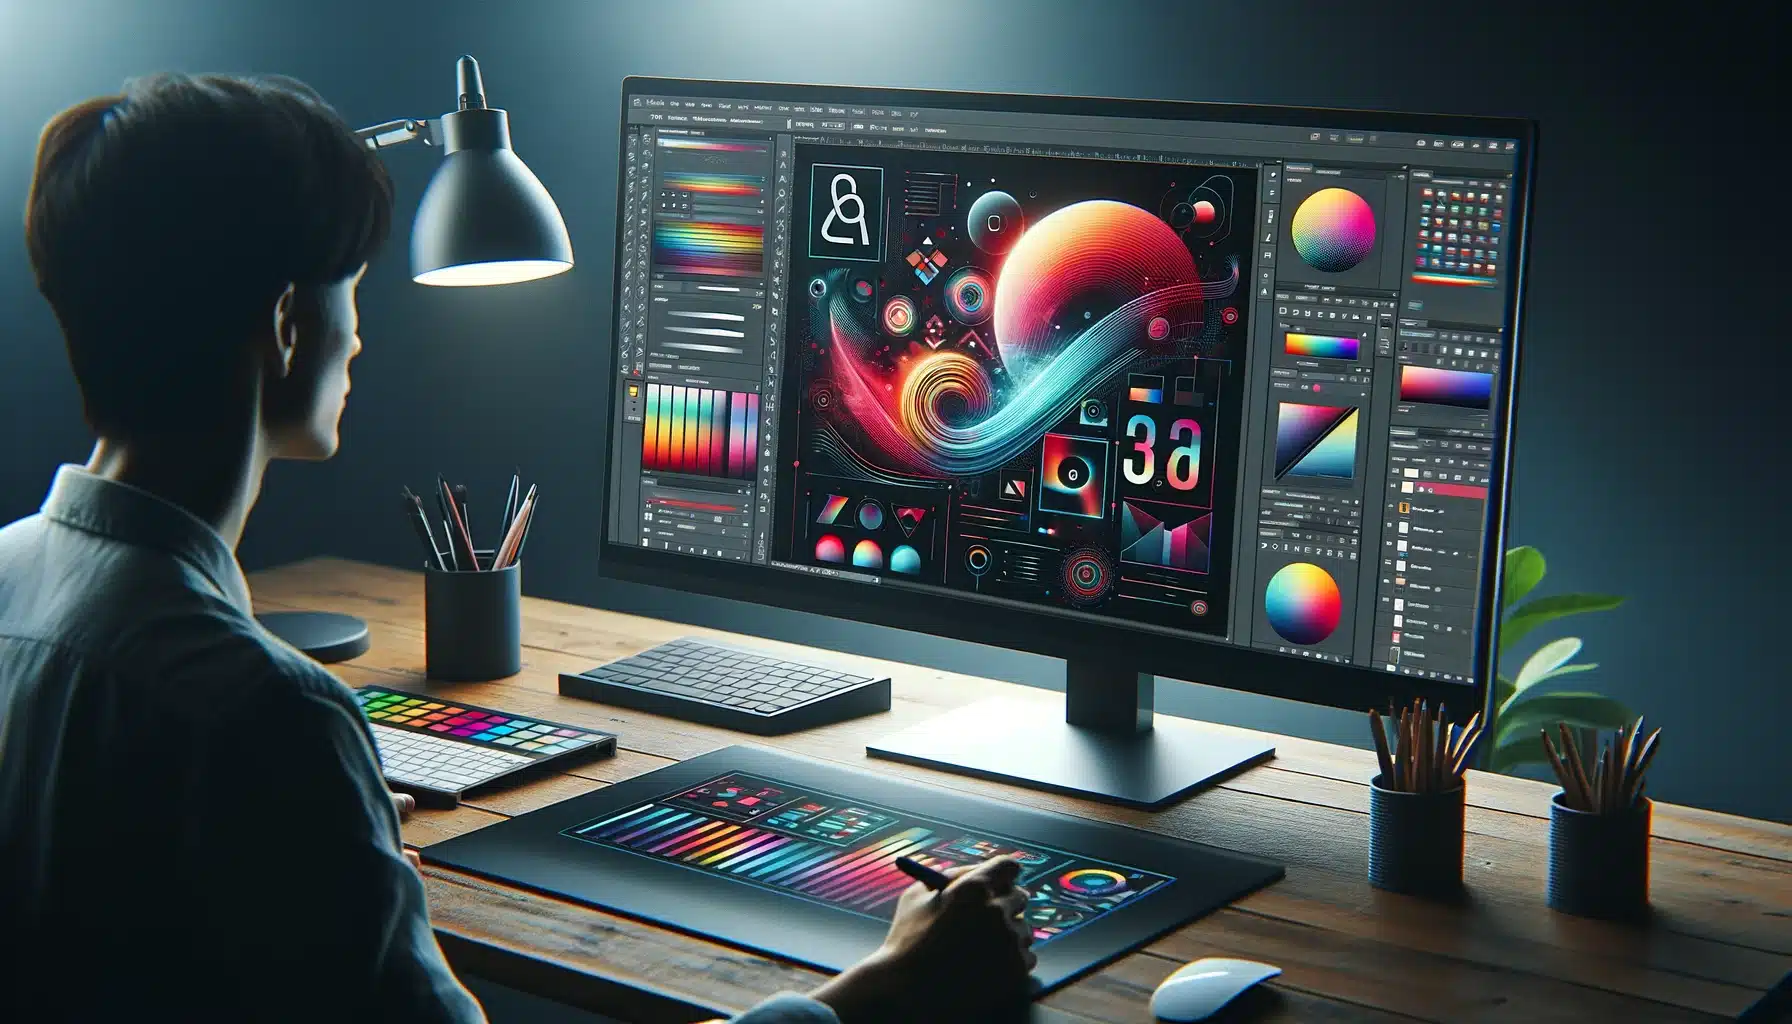 Graphic designer applying advanced gradient effects on text in Photoshop, demonstrating skill in a modern design workspace.